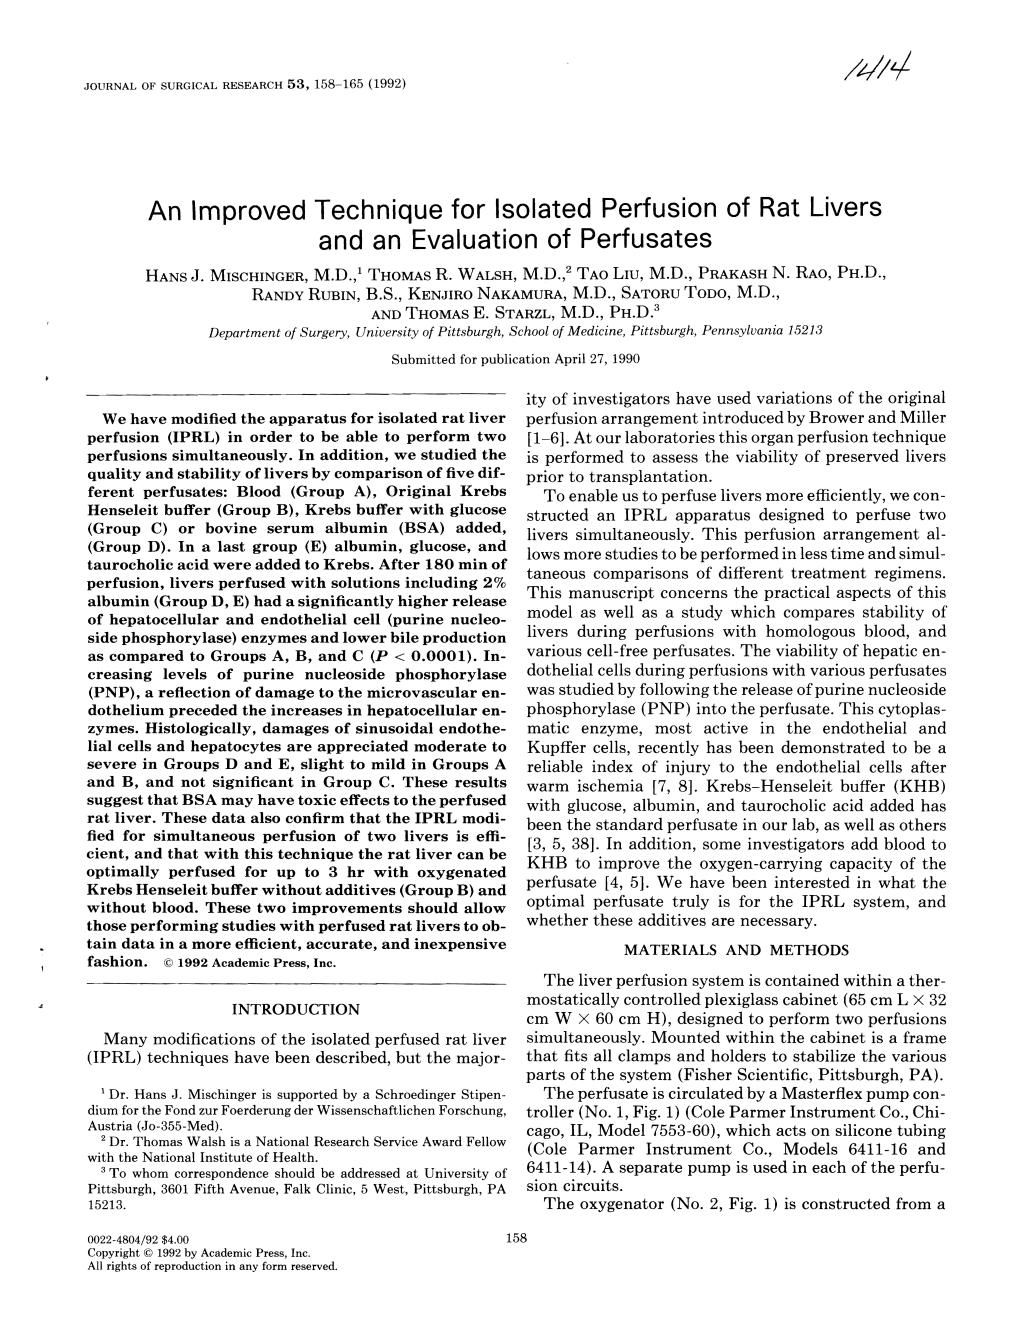 An Improved Technique for Isolated Perfusion of Rat Livers and an Evaluation of Perfusates HANS J